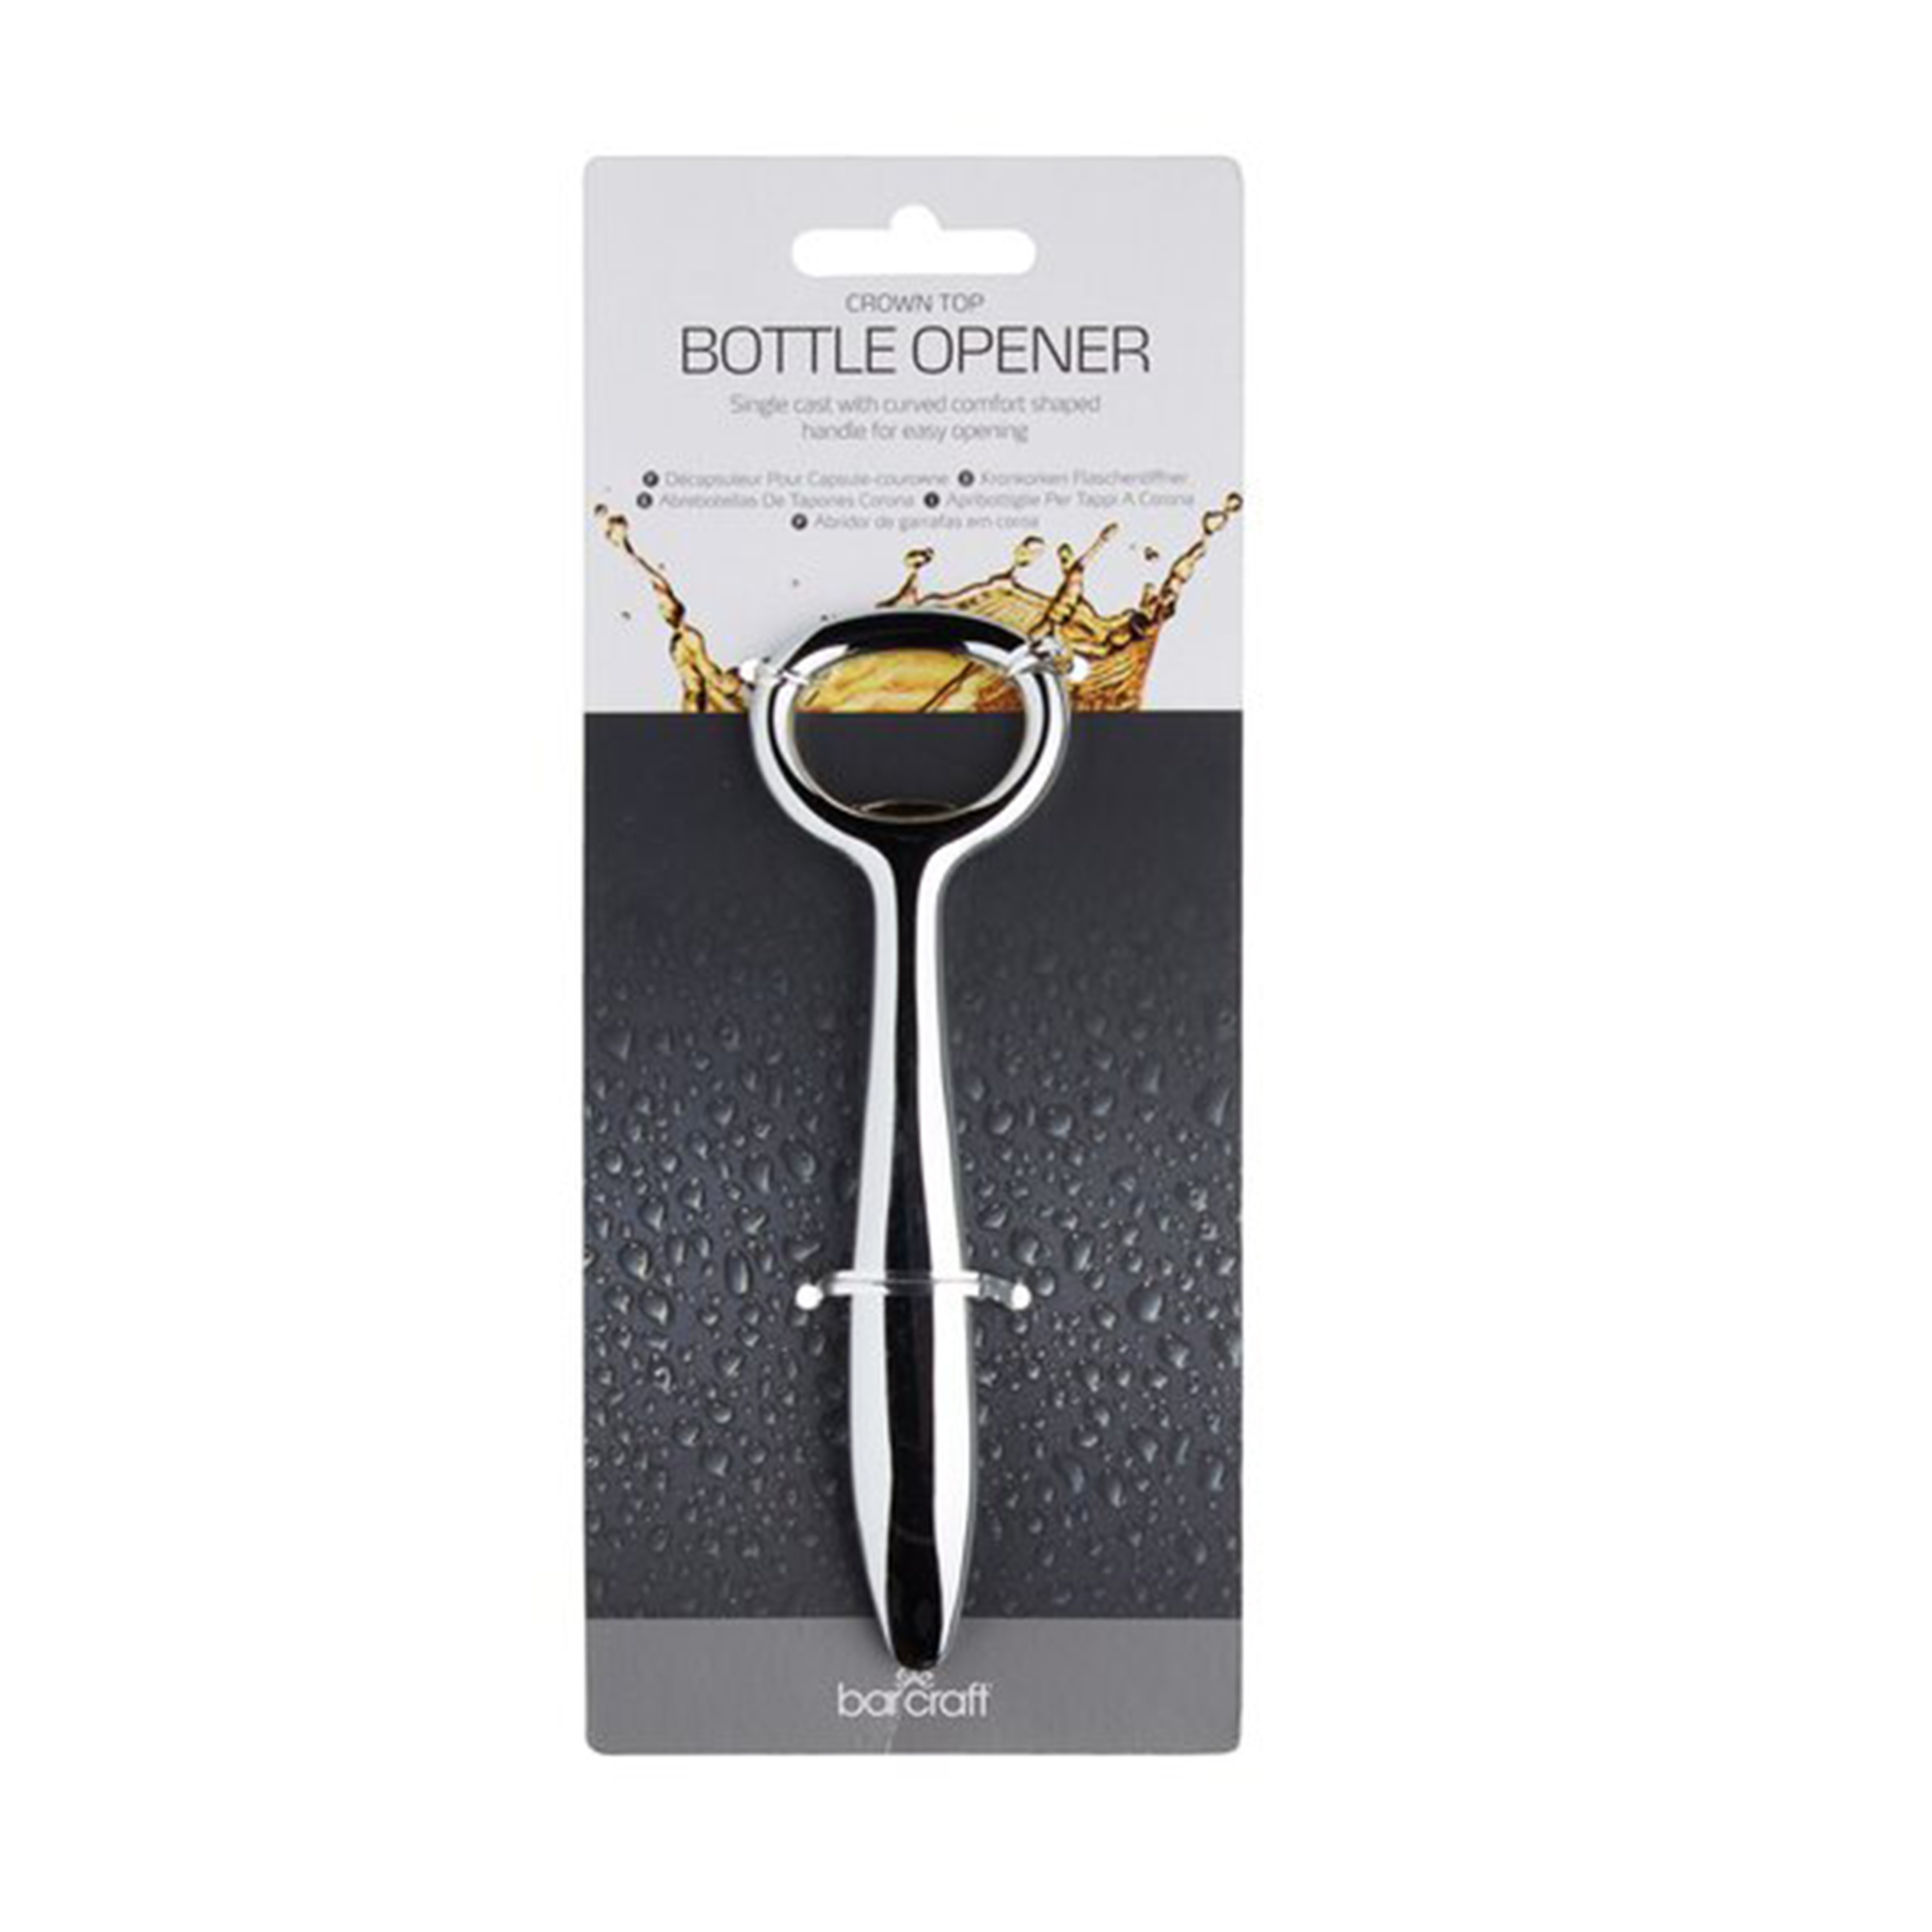 the bottle opener on it's display card